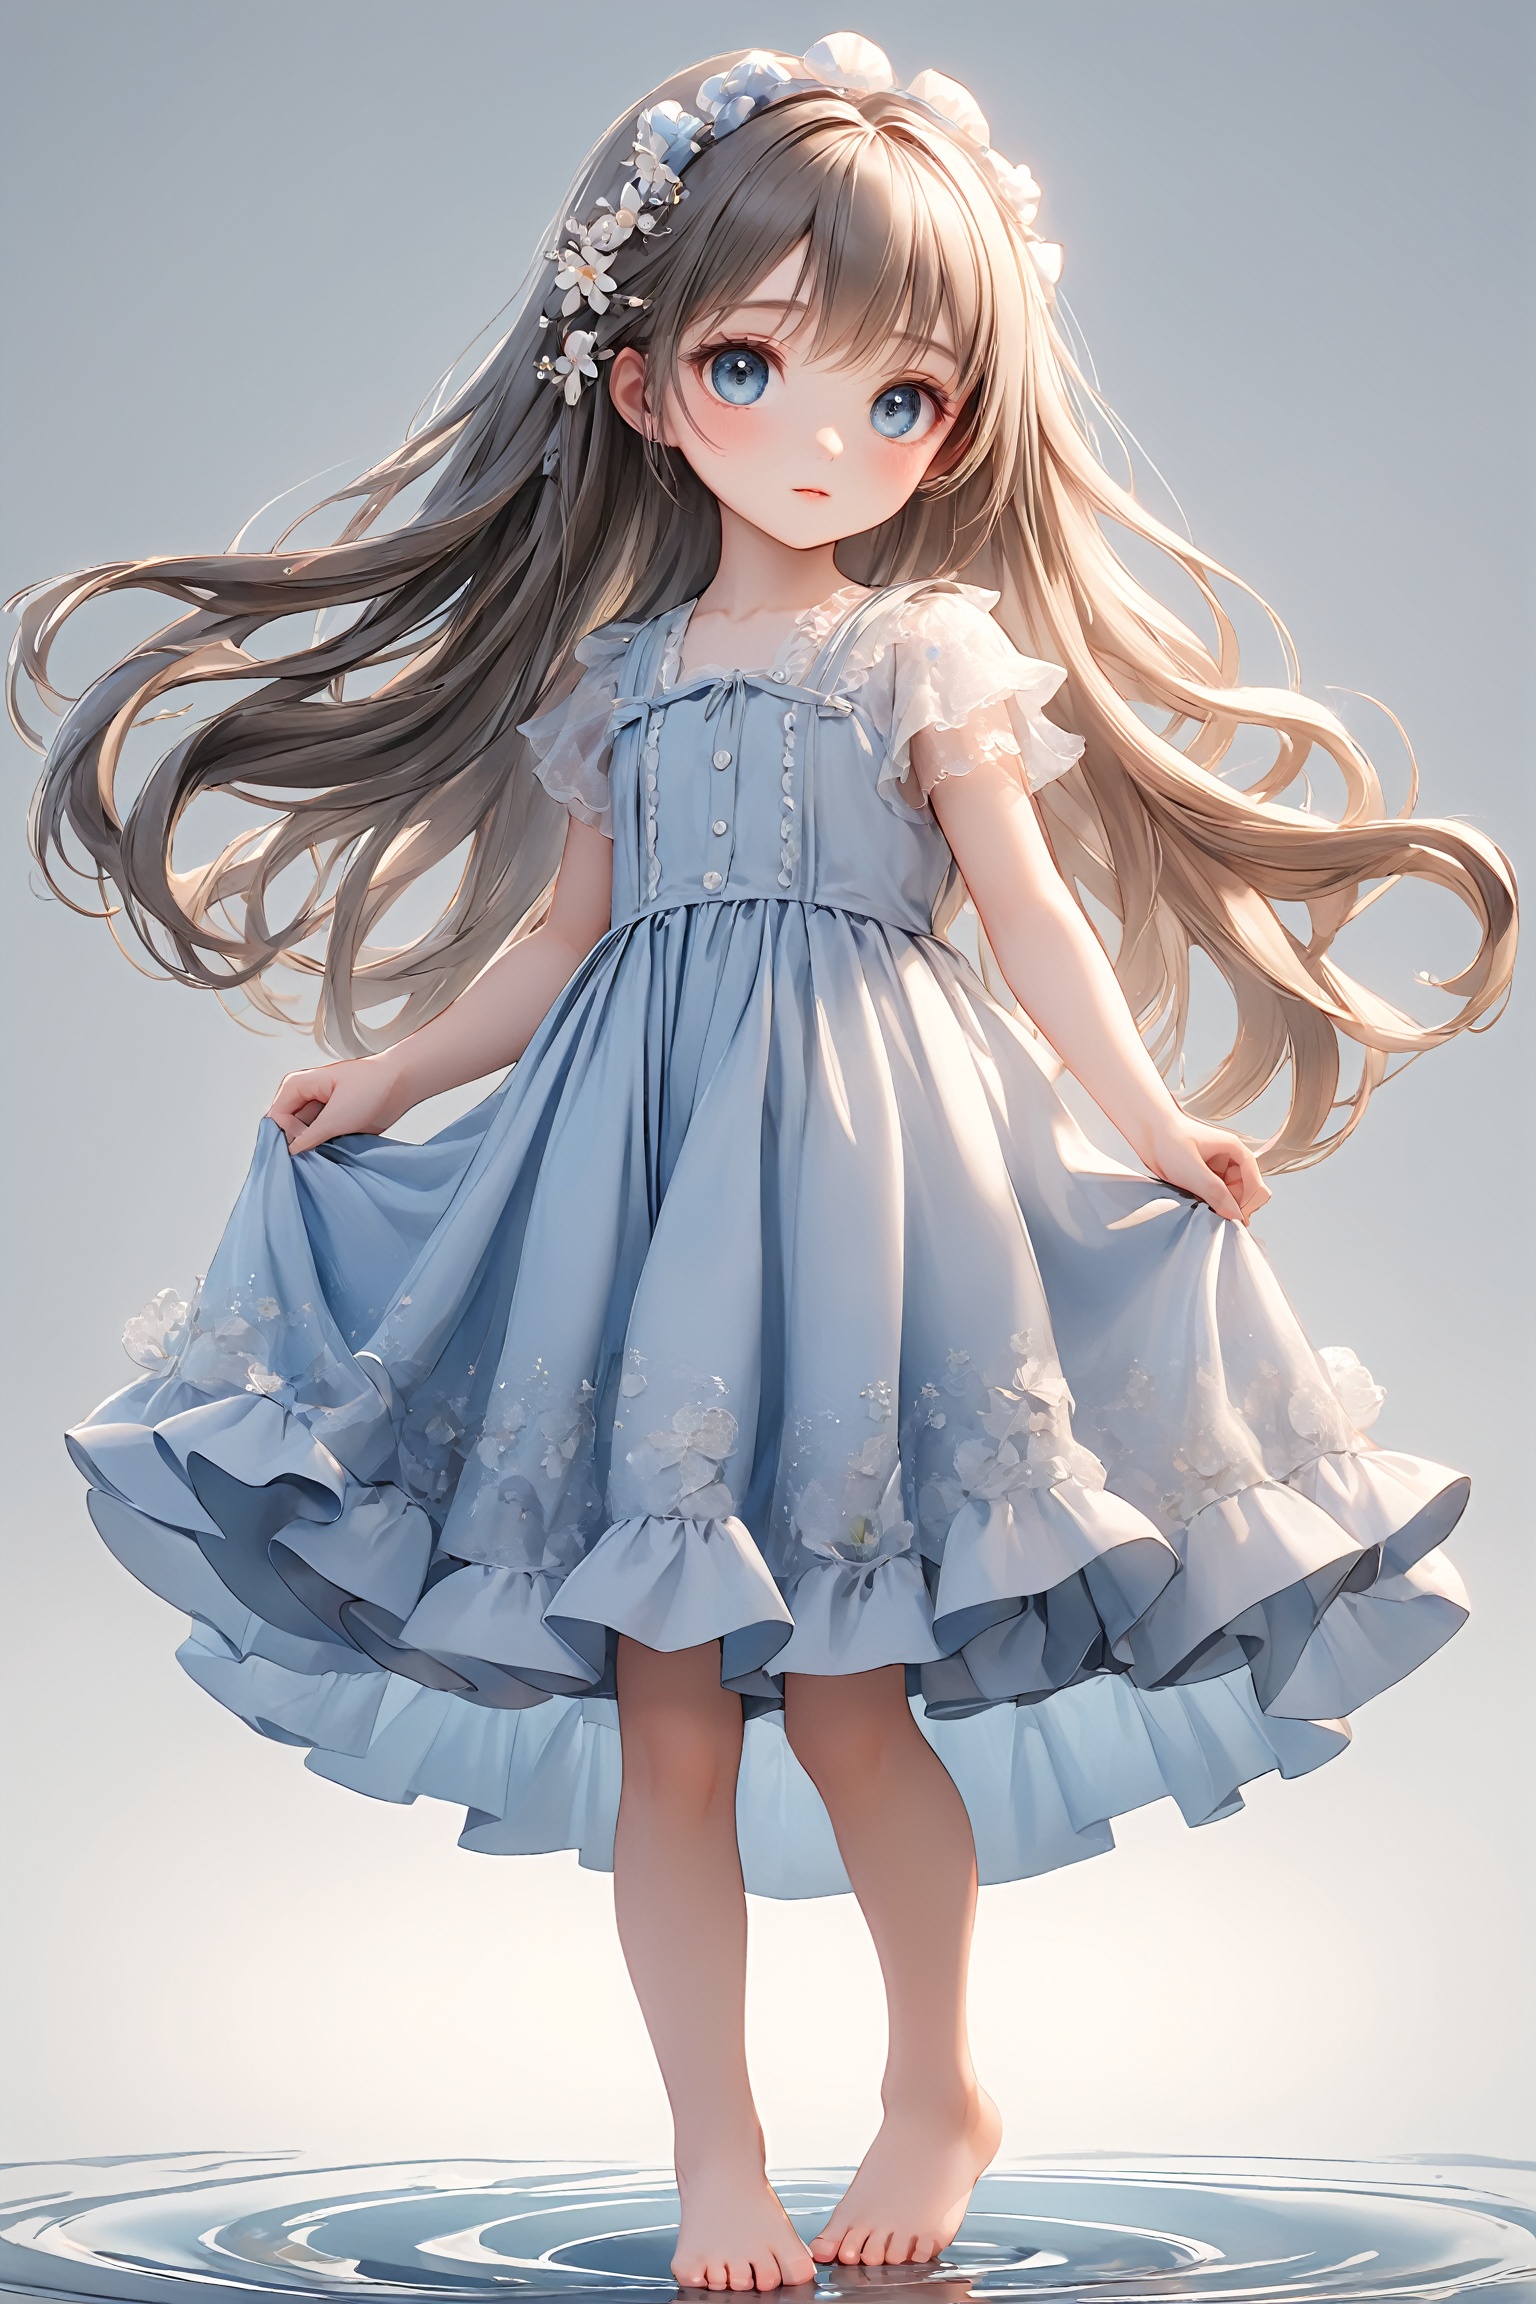  best_quality, extremely detailed details,loli,solo,1 girl,full_body,
pretty face,extremely delicate and beautiful girls,(beautiful detailed eyes),very_long_hair,cuteface,babyface,bare_foot,white_background,
cute0000,bl-ku,

 Highest picture quality, masterpiece, exquisite CG, exquisite and complicated hair accessories, big watery eyes, highlights, natural light, Super realistic, cinematic lighting texture, absolutely beautiful, 3D max, vray, c4d, ue5, corona rendering, redshift, octane rendering, （Show whole body）, （all body）,